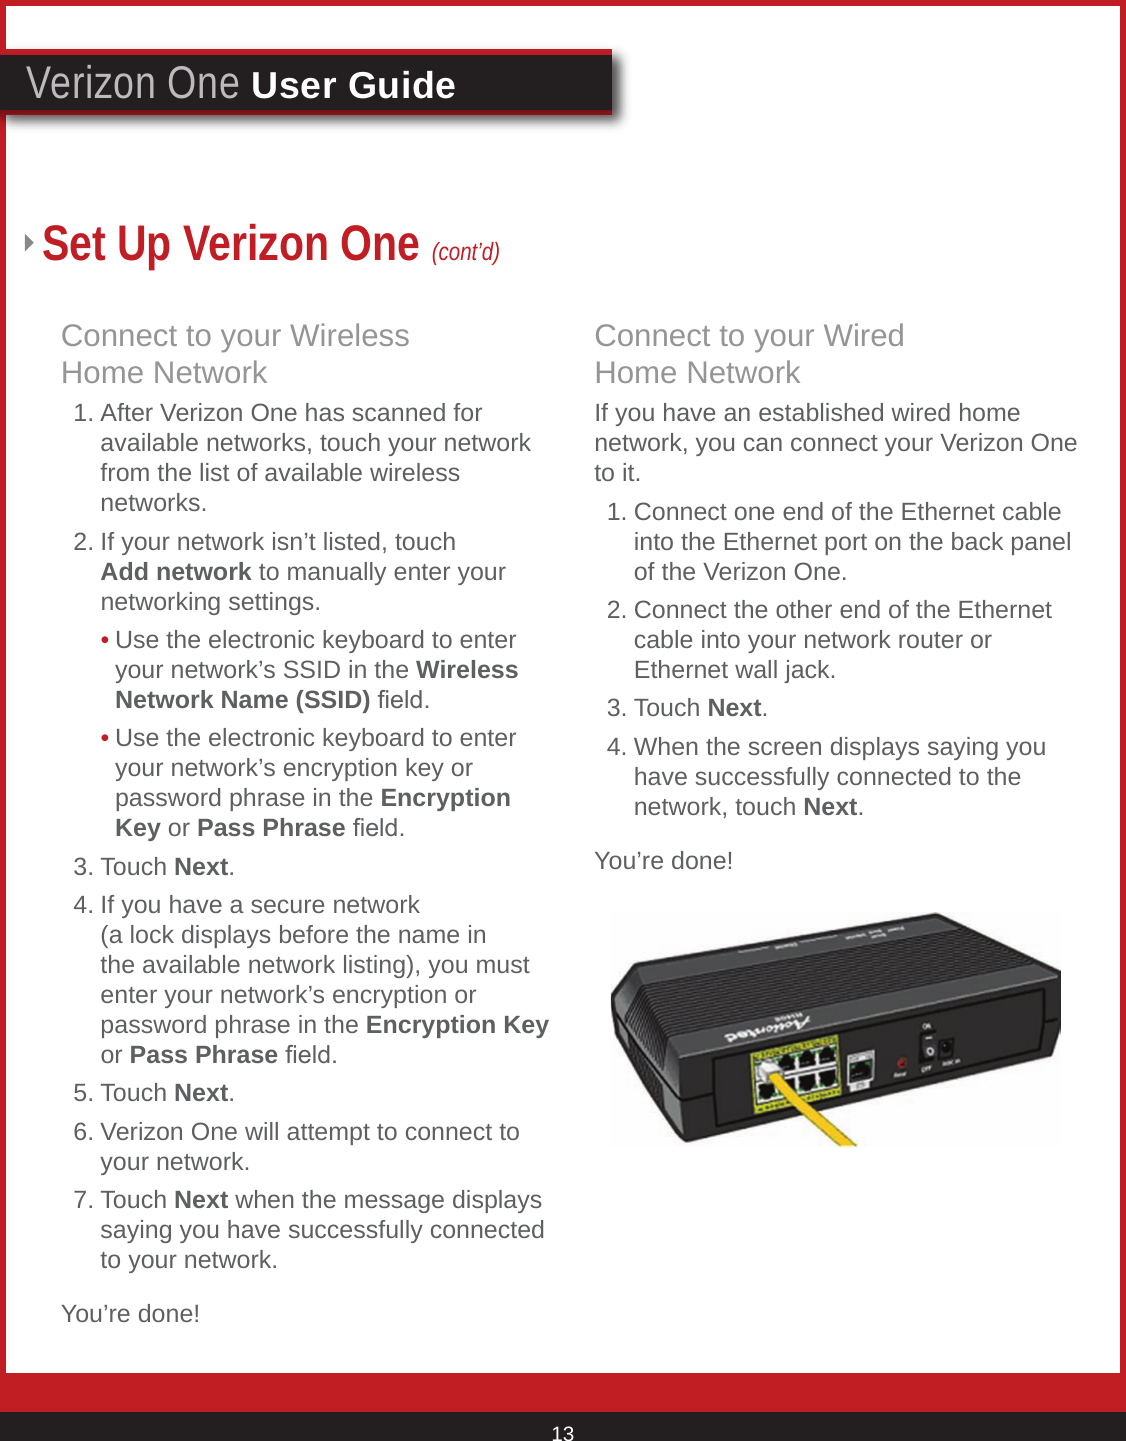 © 2007 Verizon. All Rights Reserved. 13Verizon One User GuideSet Up Verizon One (cont’d)Connect to your Wireless  Home Network  1. After Verizon One has scanned for       available networks, touch your network      from the list of available wireless        networks.   2. If your network isn’t listed, touch        Add network to manually enter your      networking settings.     • Use the electronic keyboard to enter        your network’s SSID in the Wireless        Network Name (SSID) eld.     • Use the electronic keyboard to enter        your network’s encryption key or          password phrase in the Encryption        Key or Pass Phrase eld.   3. Touch Next.  4. If you have a secure network        (a lock displays before the name in      the available network listing), you must      enter your network’s encryption or       password phrase in the Encryption Key     or Pass Phrase eld.   5. Touch Next.   6. Verizon One will attempt to connect to      your network.  7. Touch Next when the message displays      saying you have successfully connected      to your network.You’re done!Connect to your Wired    Home NetworkIf you have an established wired home network, you can connect your Verizon One to it.  1. Connect one end of the Ethernet cable      into the Ethernet port on the back panel      of the Verizon One.   2. Connect the other end of the Ethernet      cable into your network router or        Ethernet wall jack.   3. Touch Next.  4. When the screen displays saying you      have successfully connected to the      network, touch Next.You’re done!     